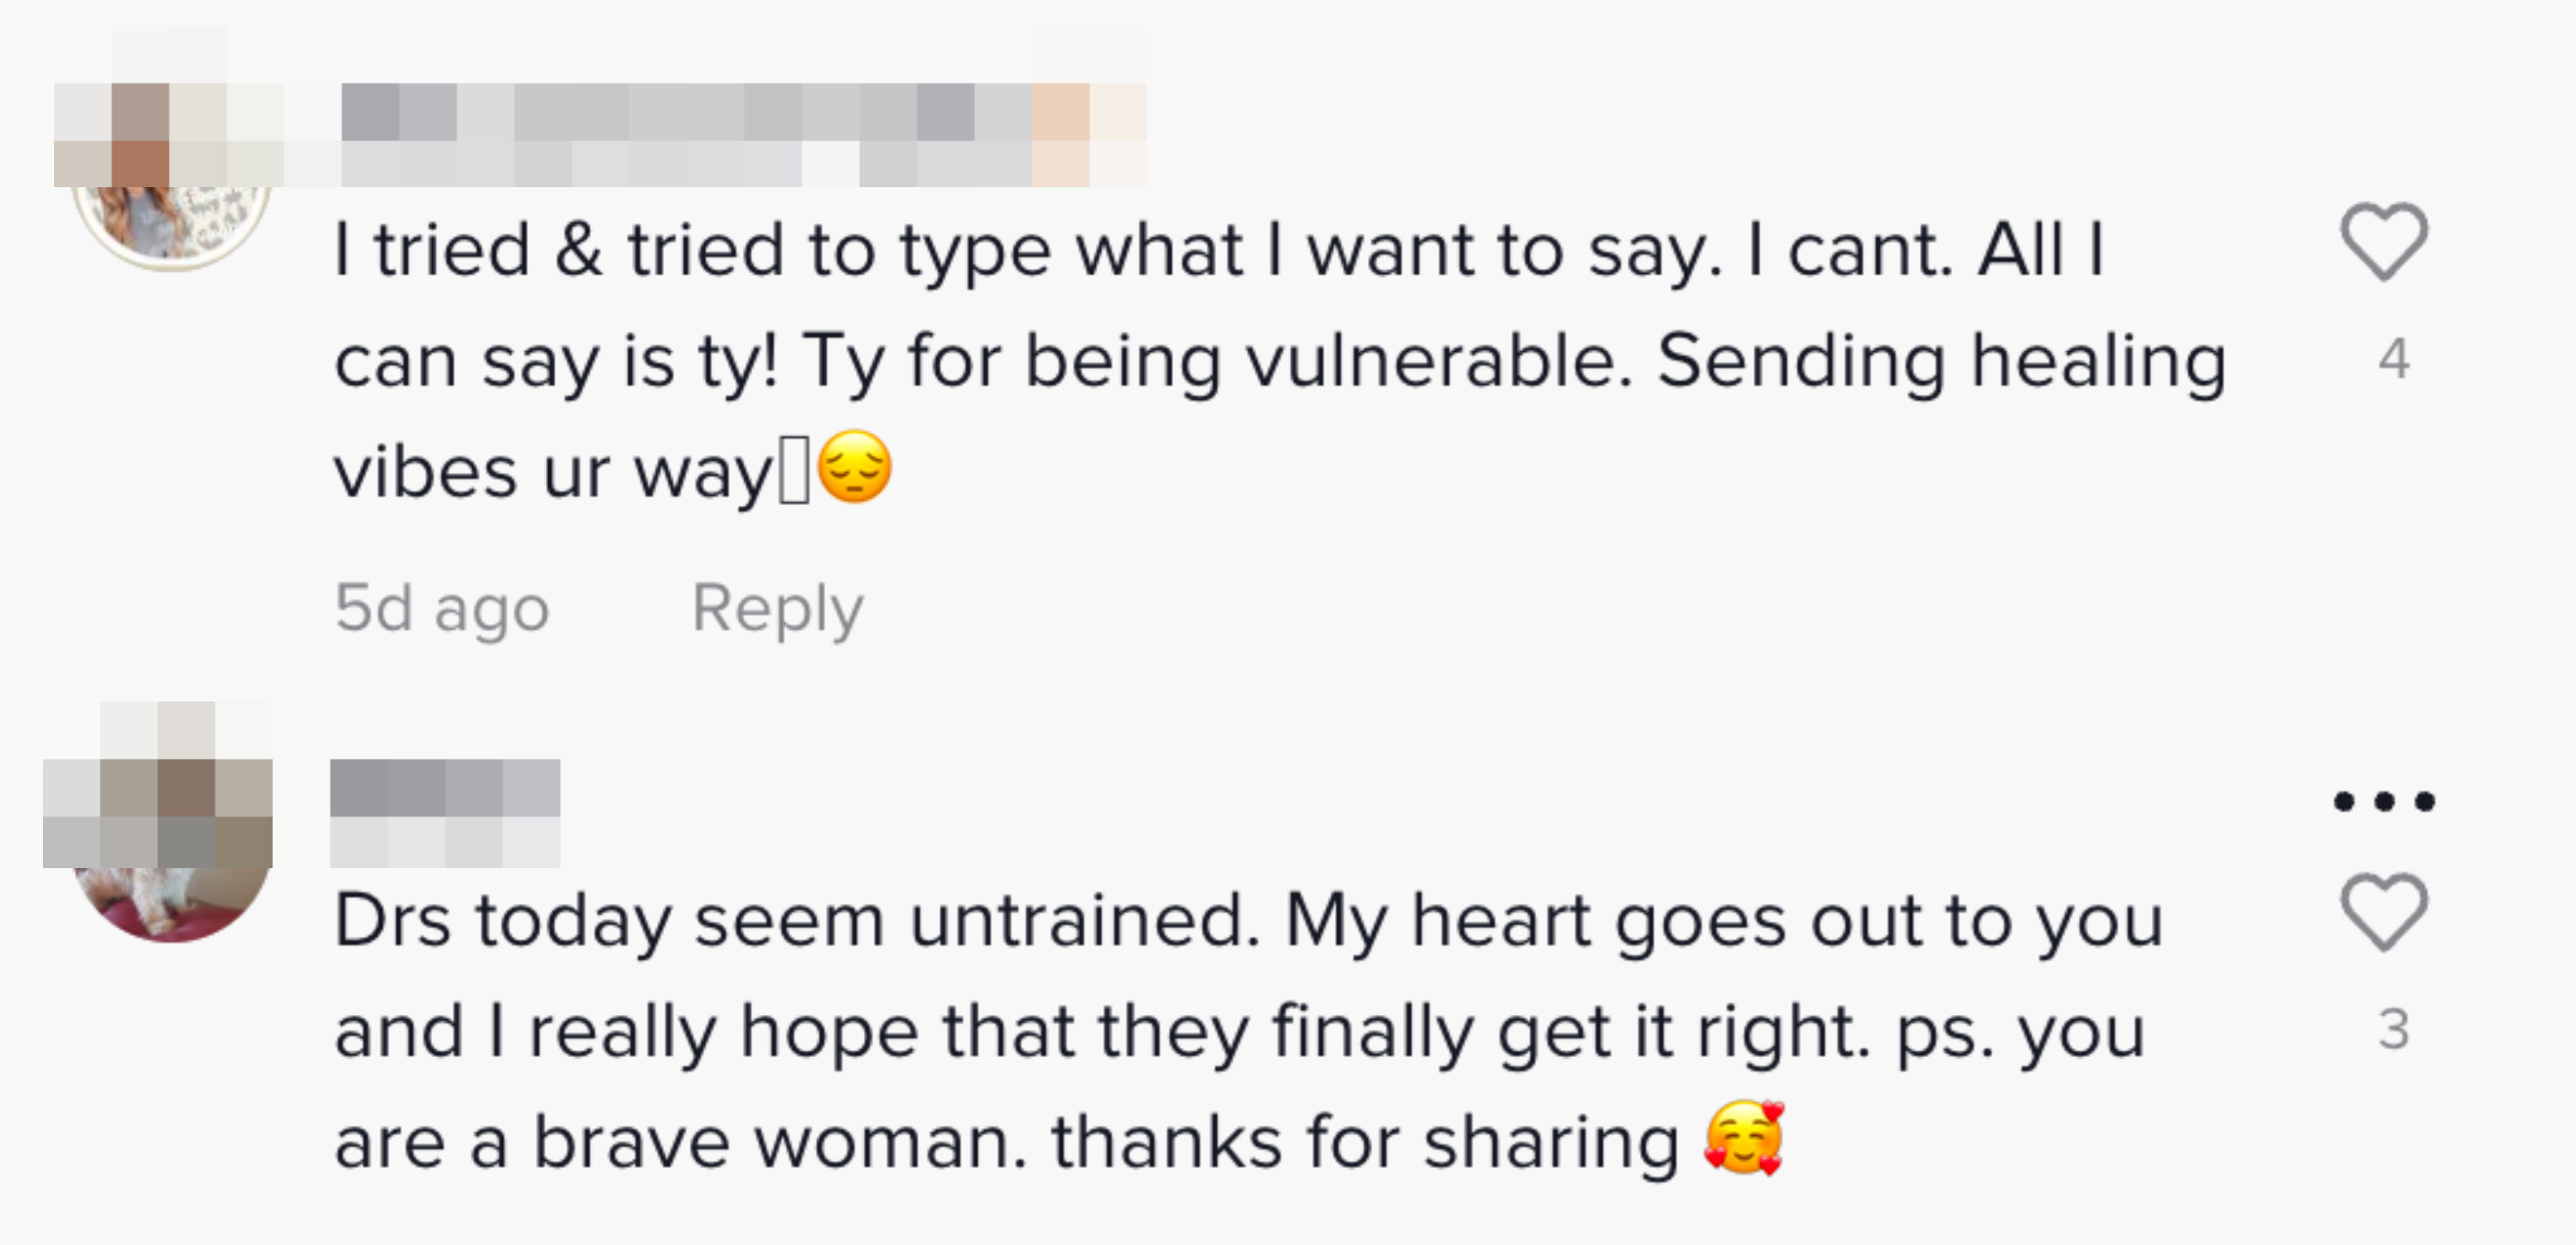 Multiple commenters sending support to Melita and praising her bravery and vulnerability